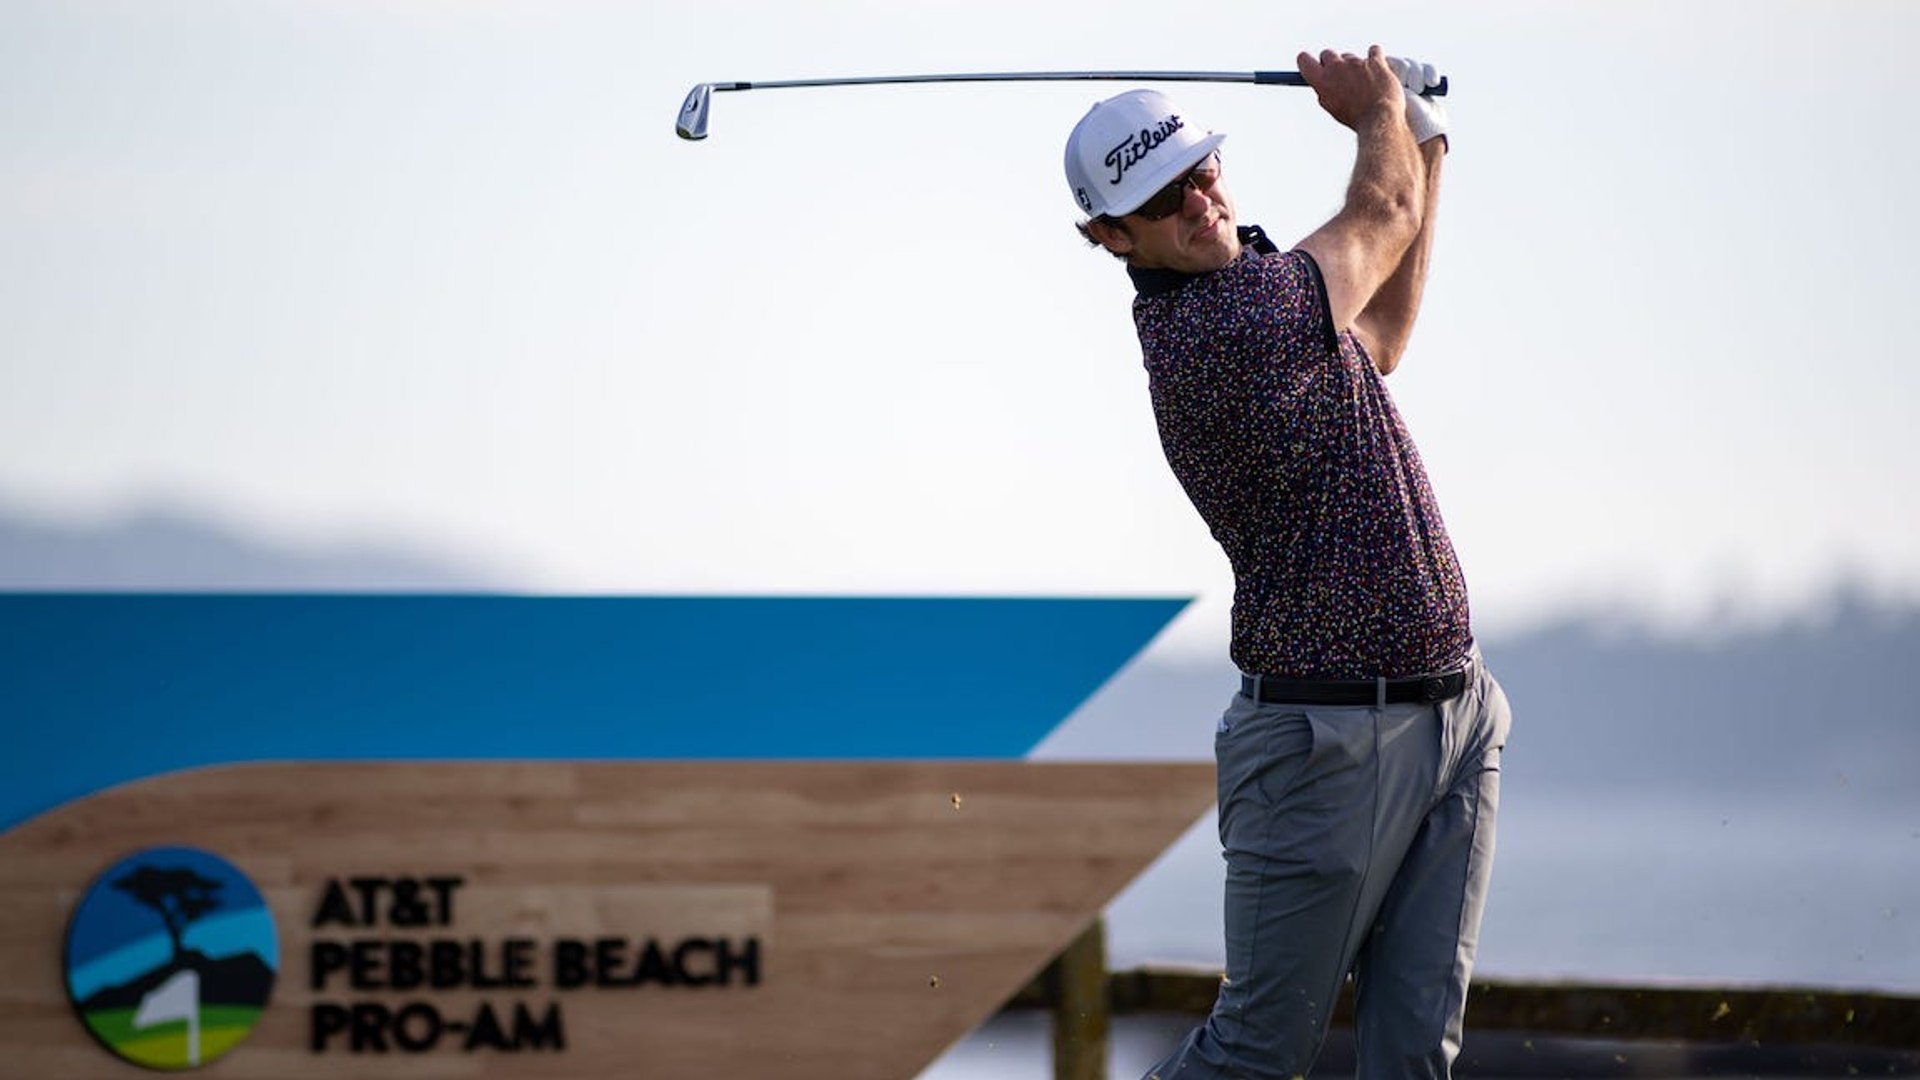 What Is The Format For The ATandT Pebble Beach Pro-Am?